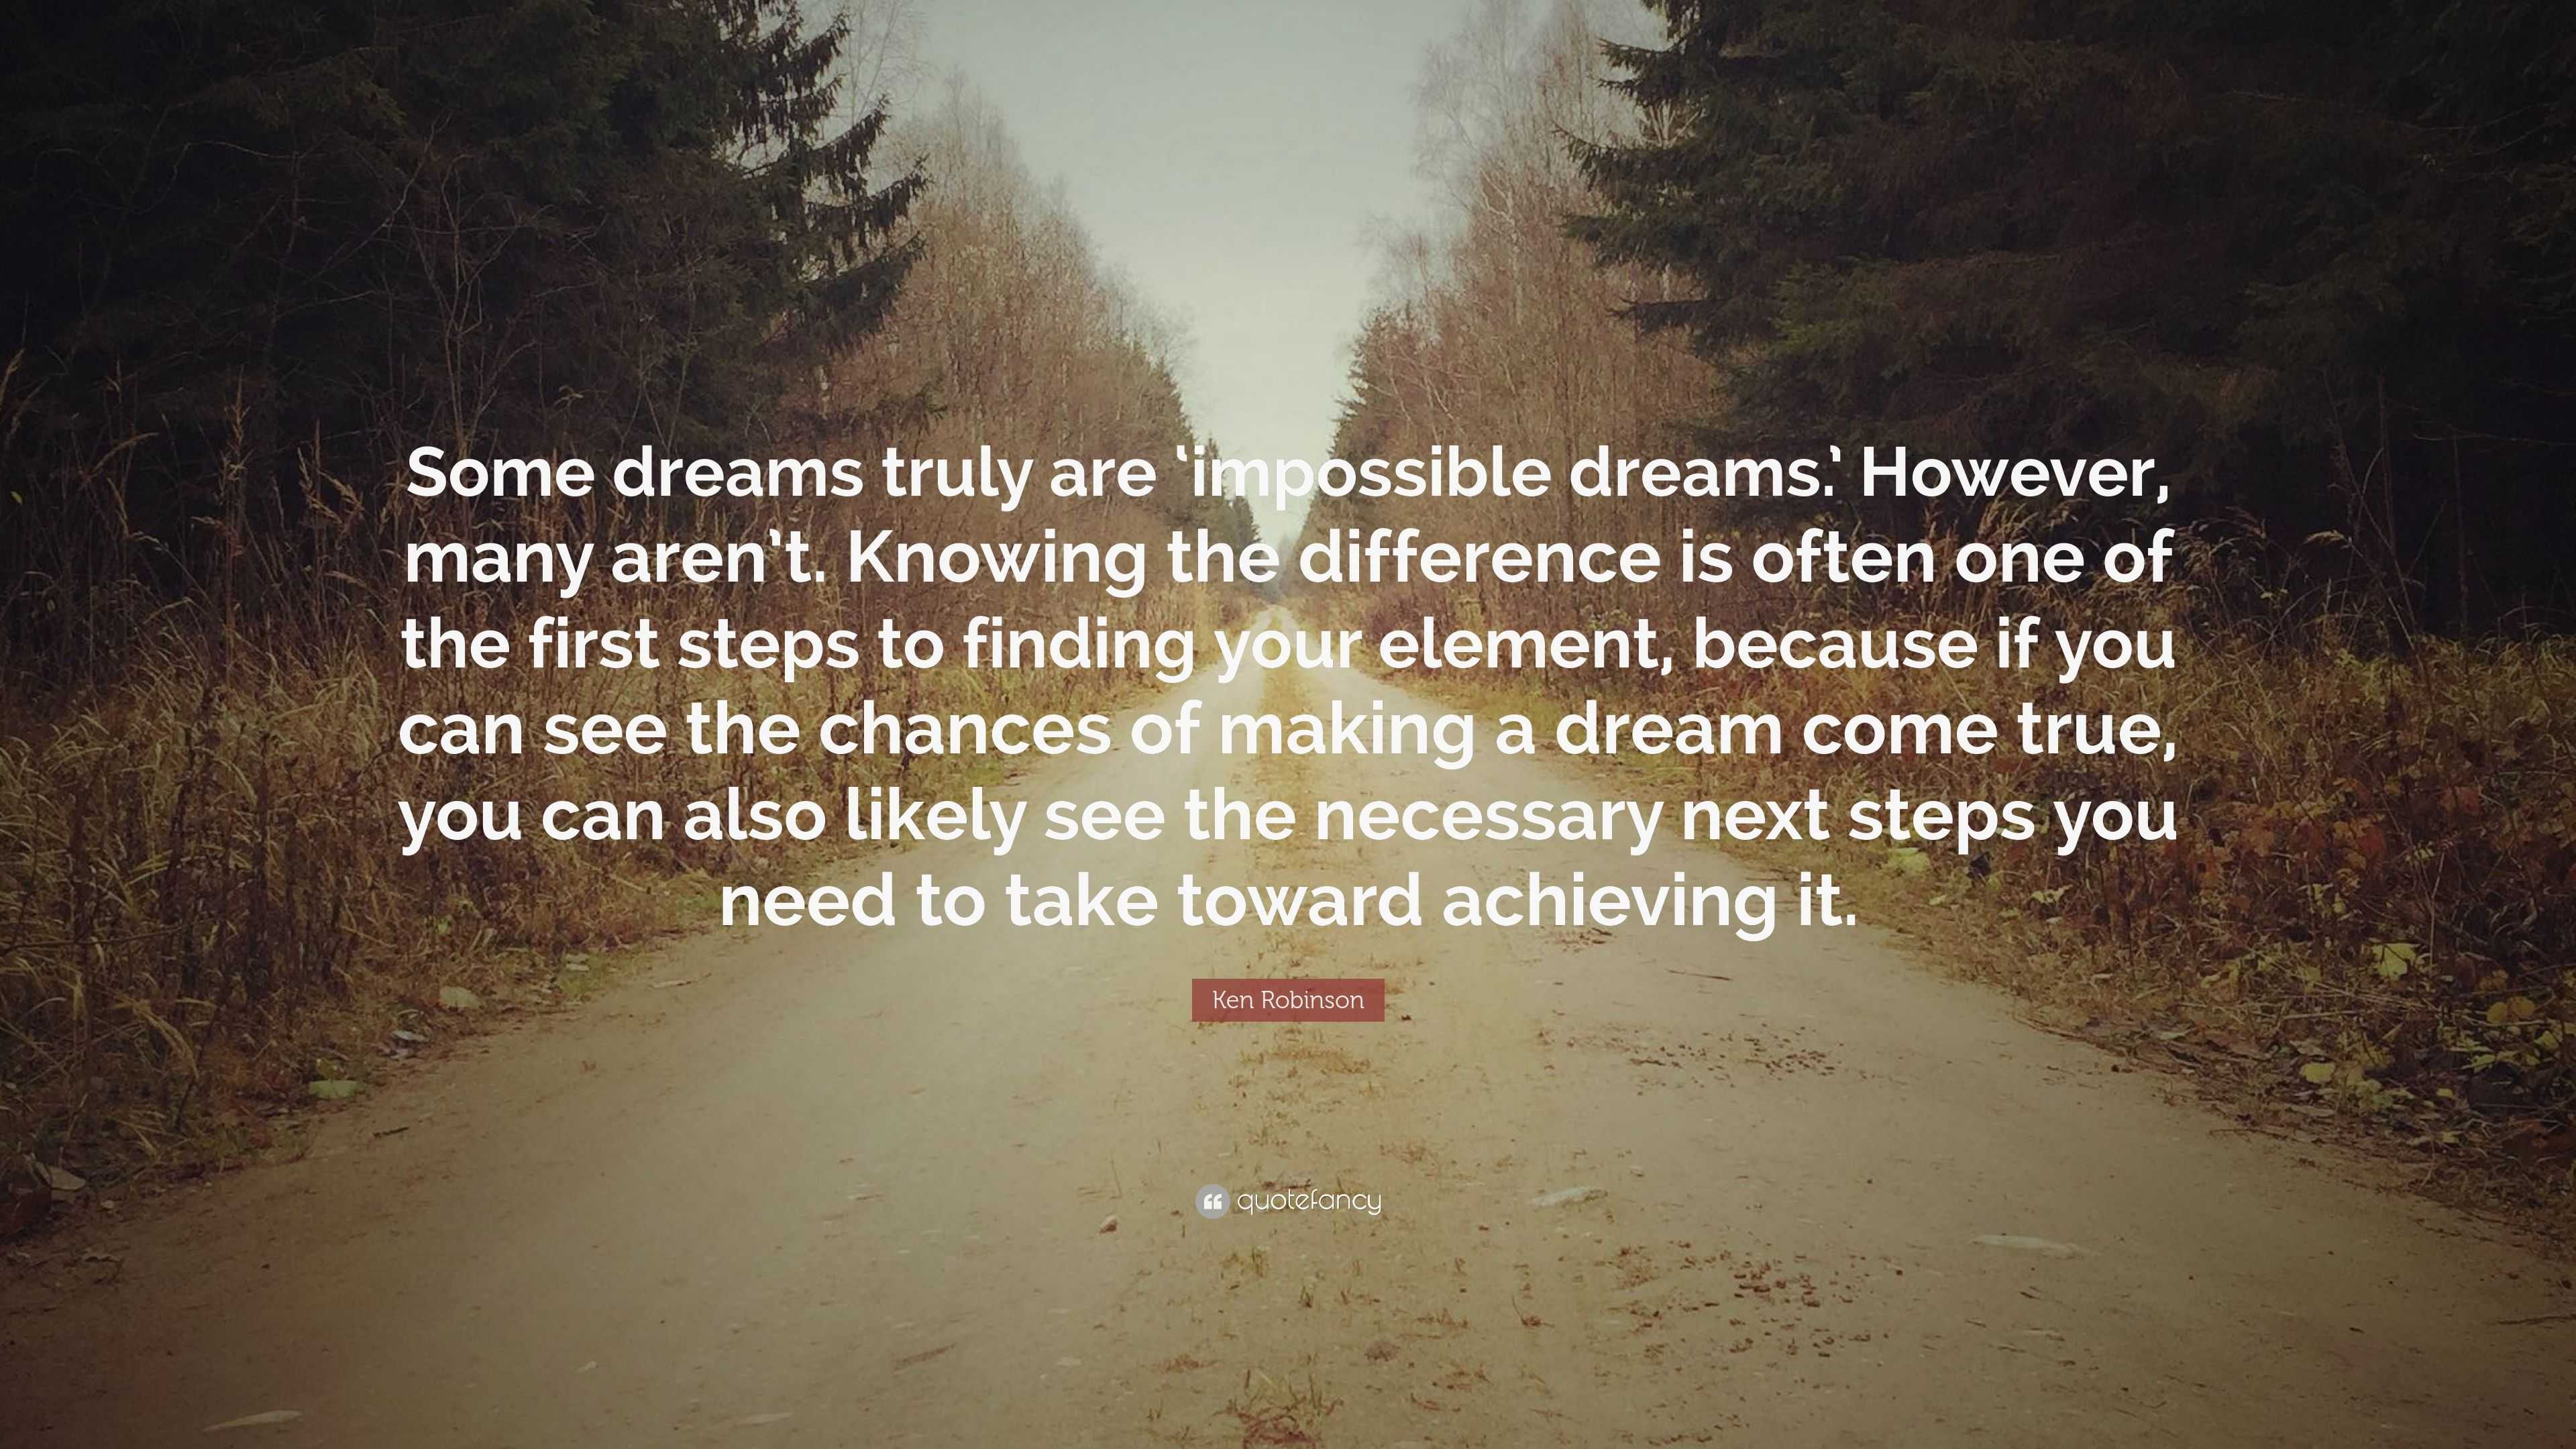 Ken Robinson Quote: “Some dreams truly are ‘impossible dreams.’ However ...